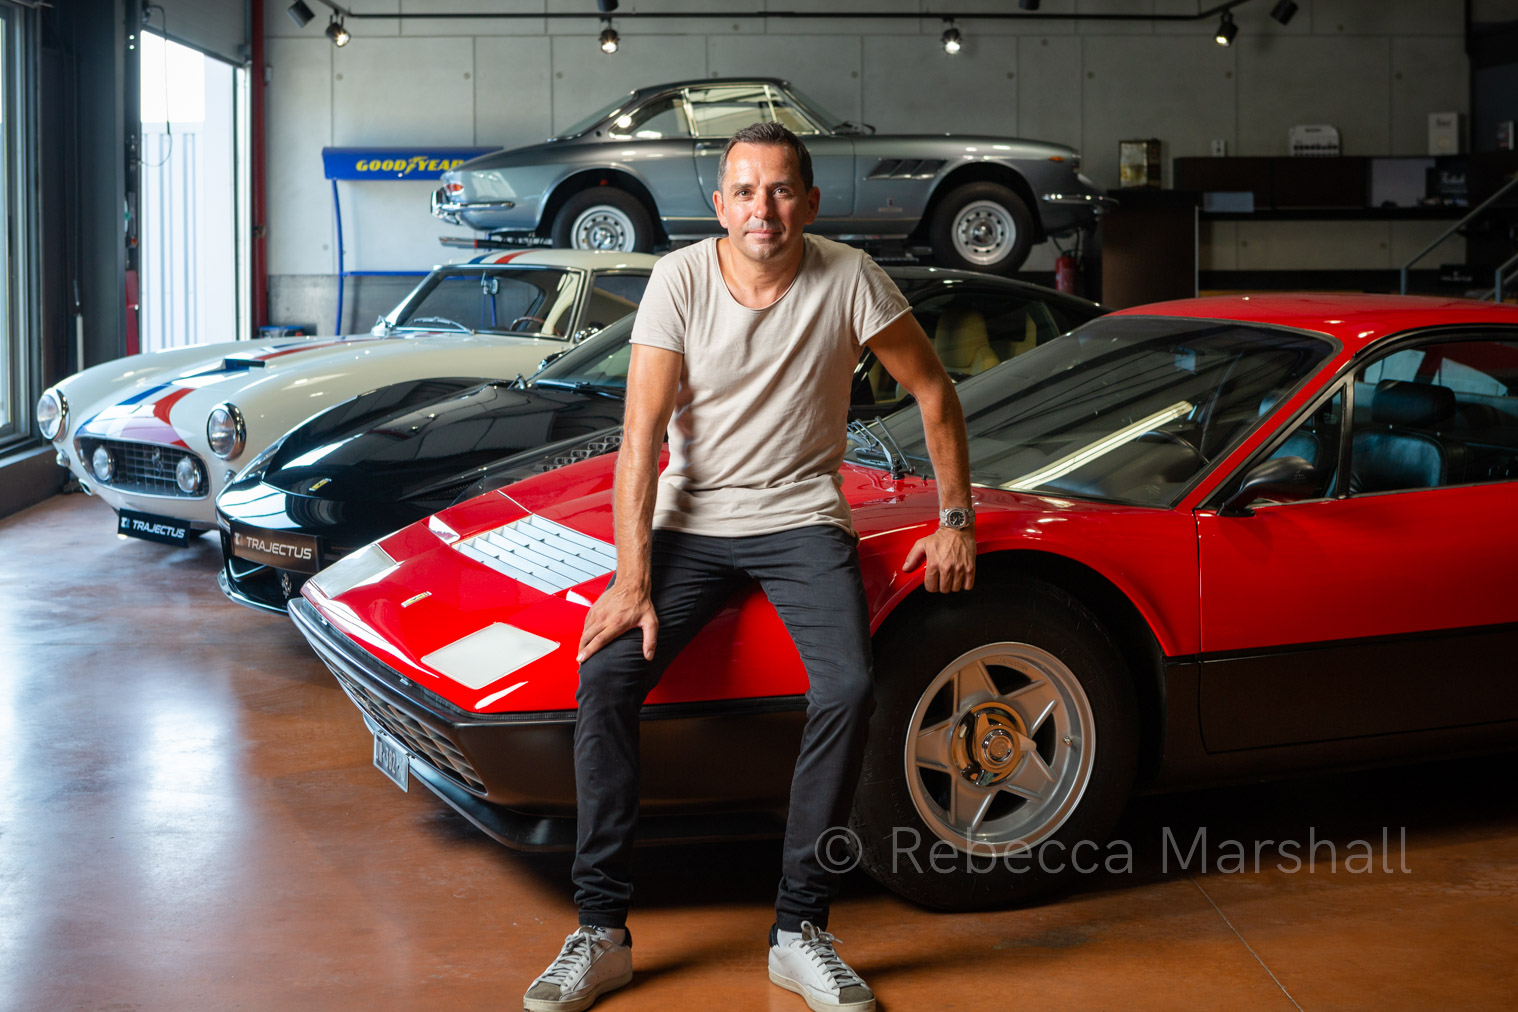 Man poses for the photographer sitting on the bonnet of his red vintage Ferrari in a garage with other vintage cars in the background